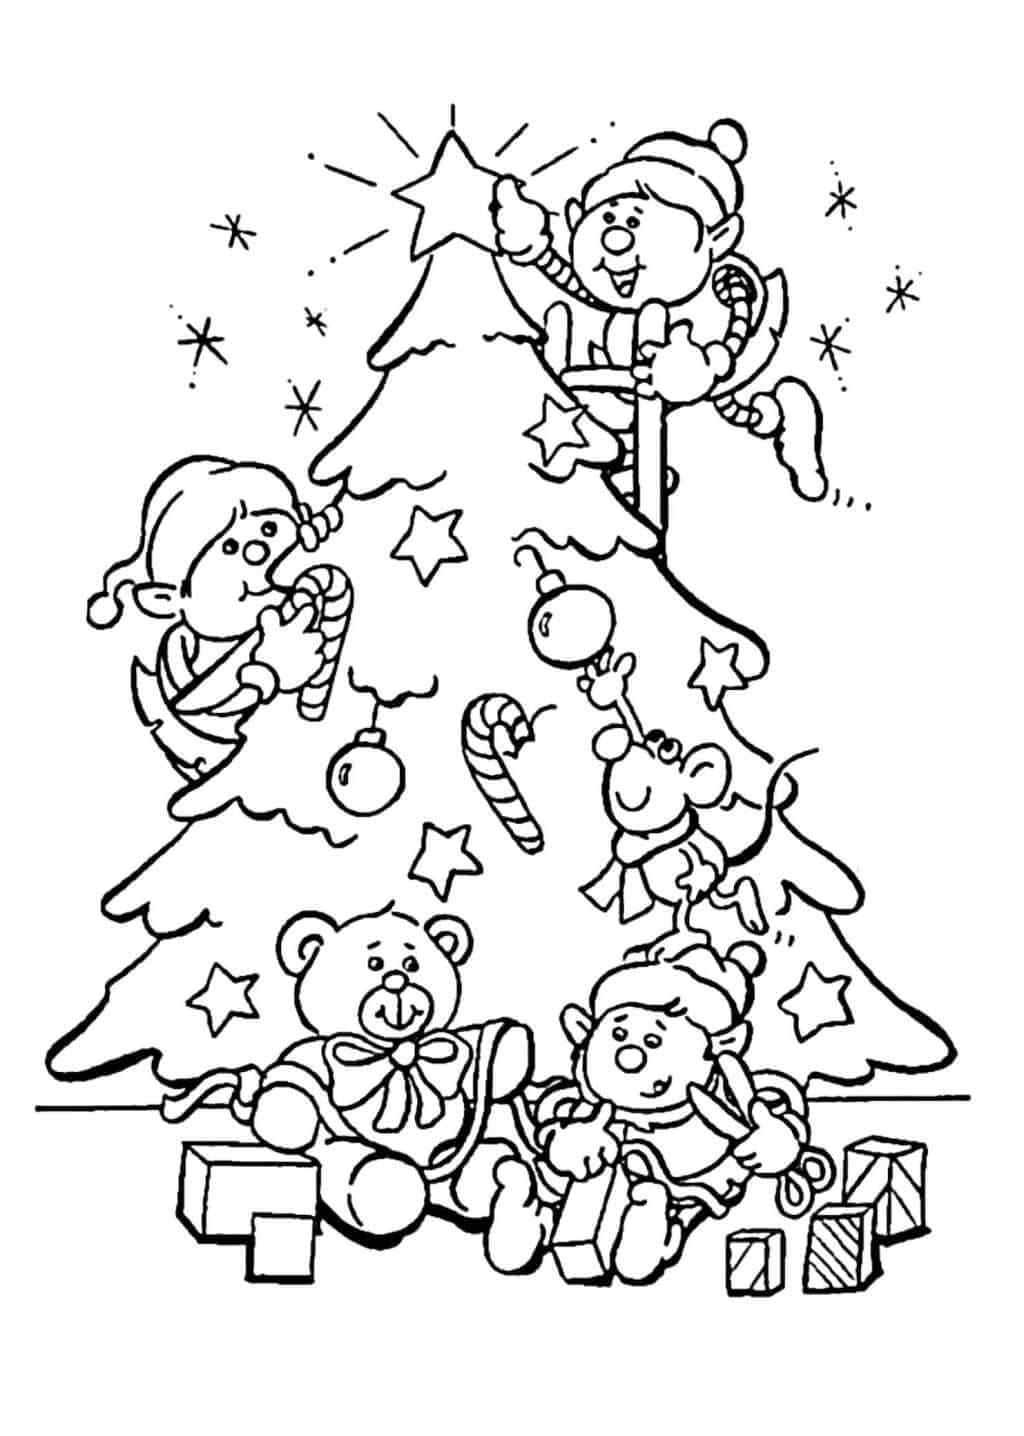 Decorate The Tree With The Mouse Coloring Page